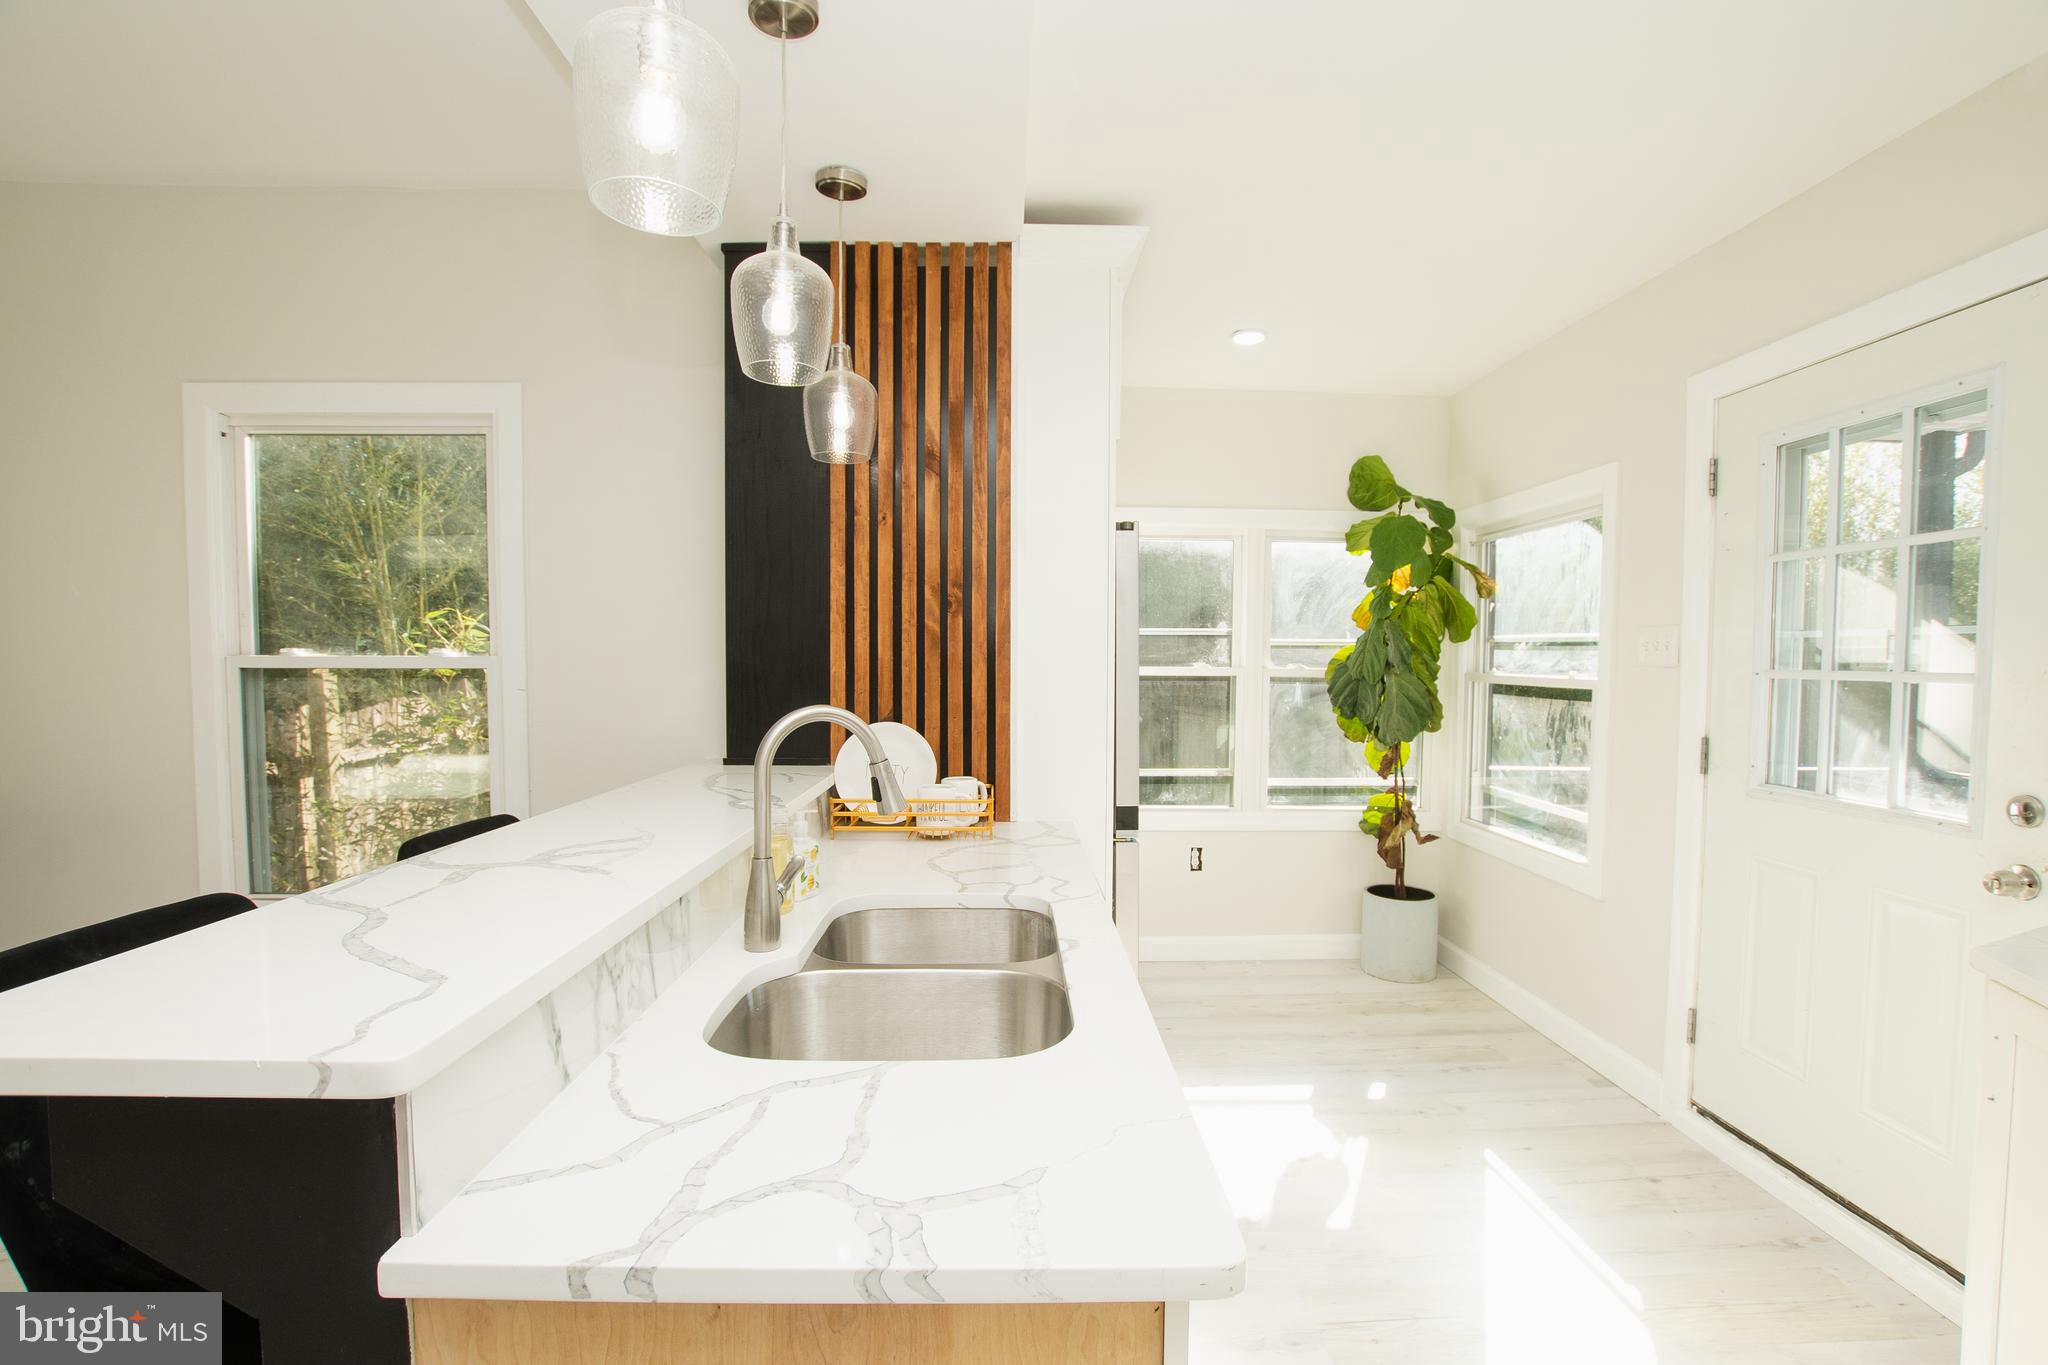 a kitchen with a sink a counter top space and living room view